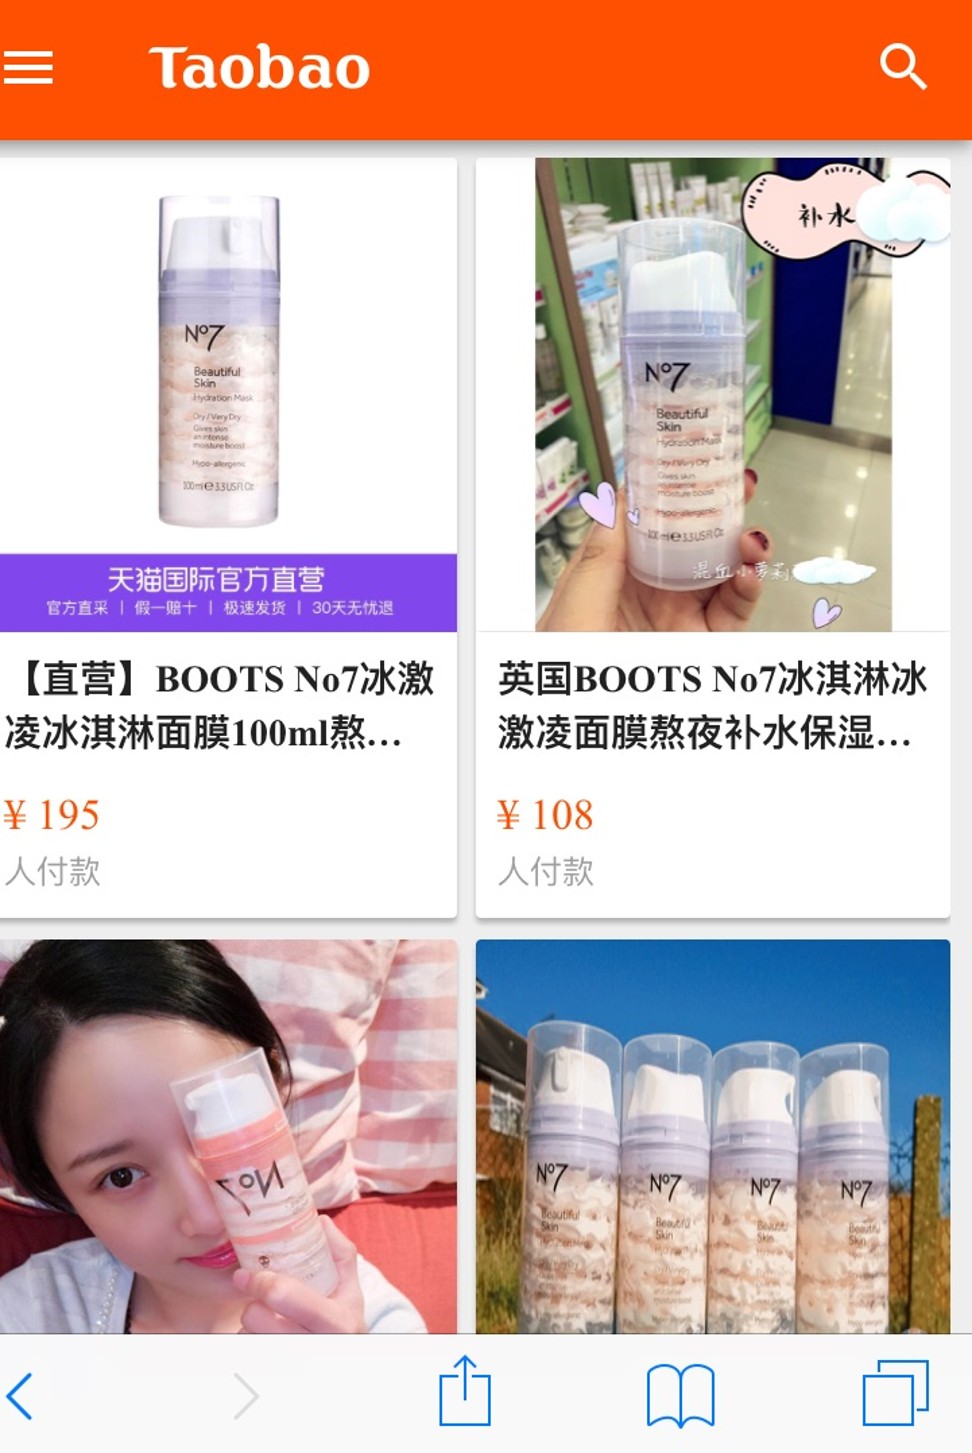 Boots No7 on Taobao.